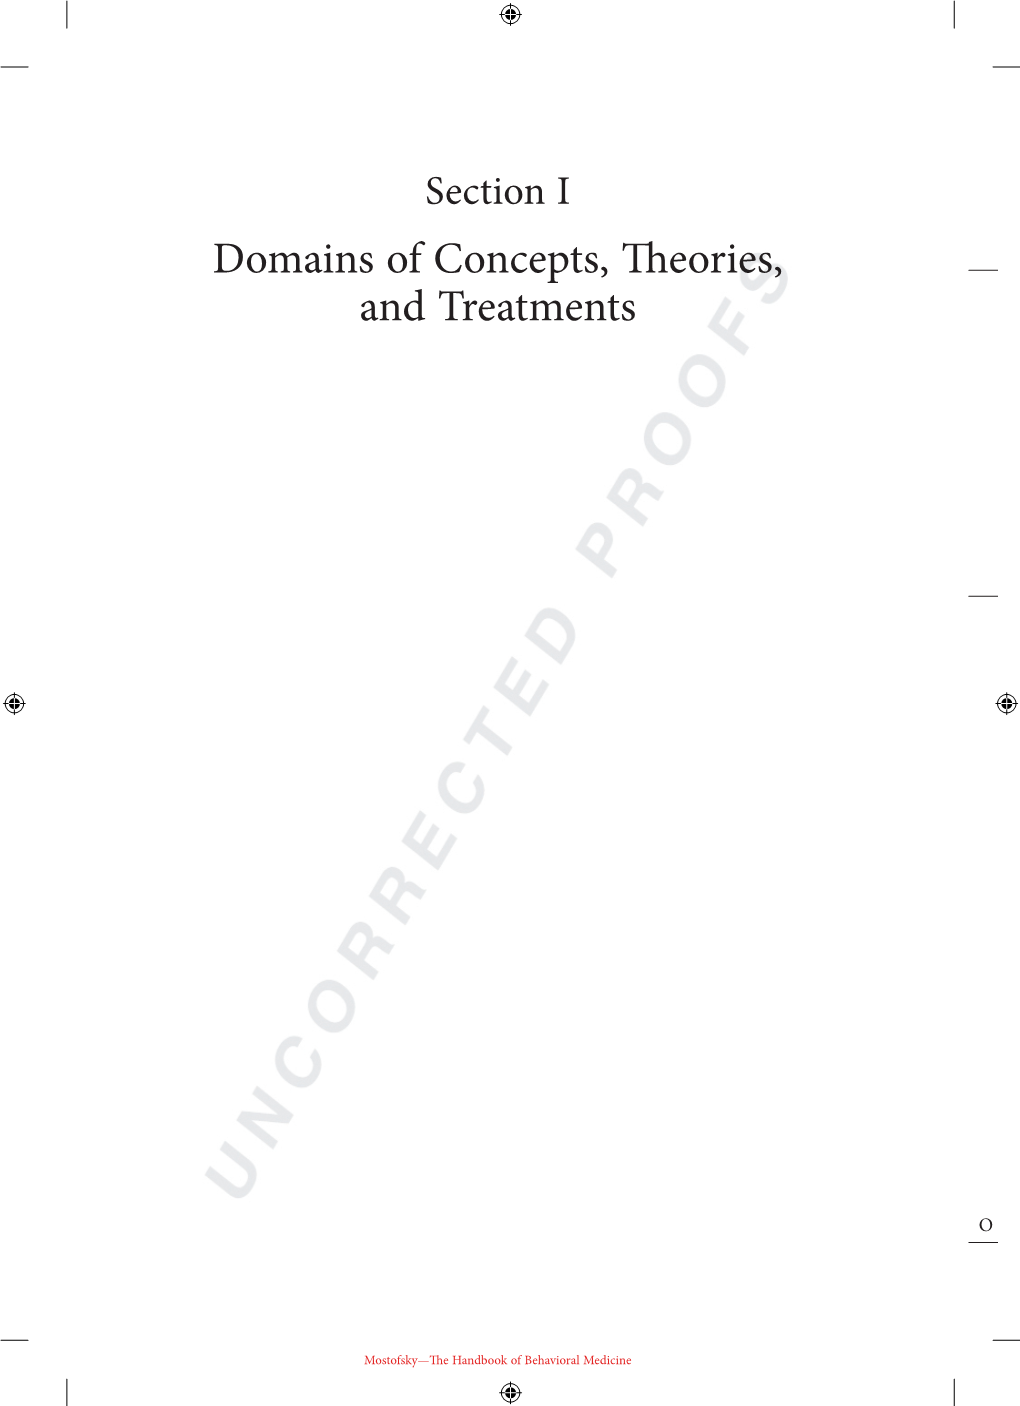 Domains of Concepts, Theories, and Treatments